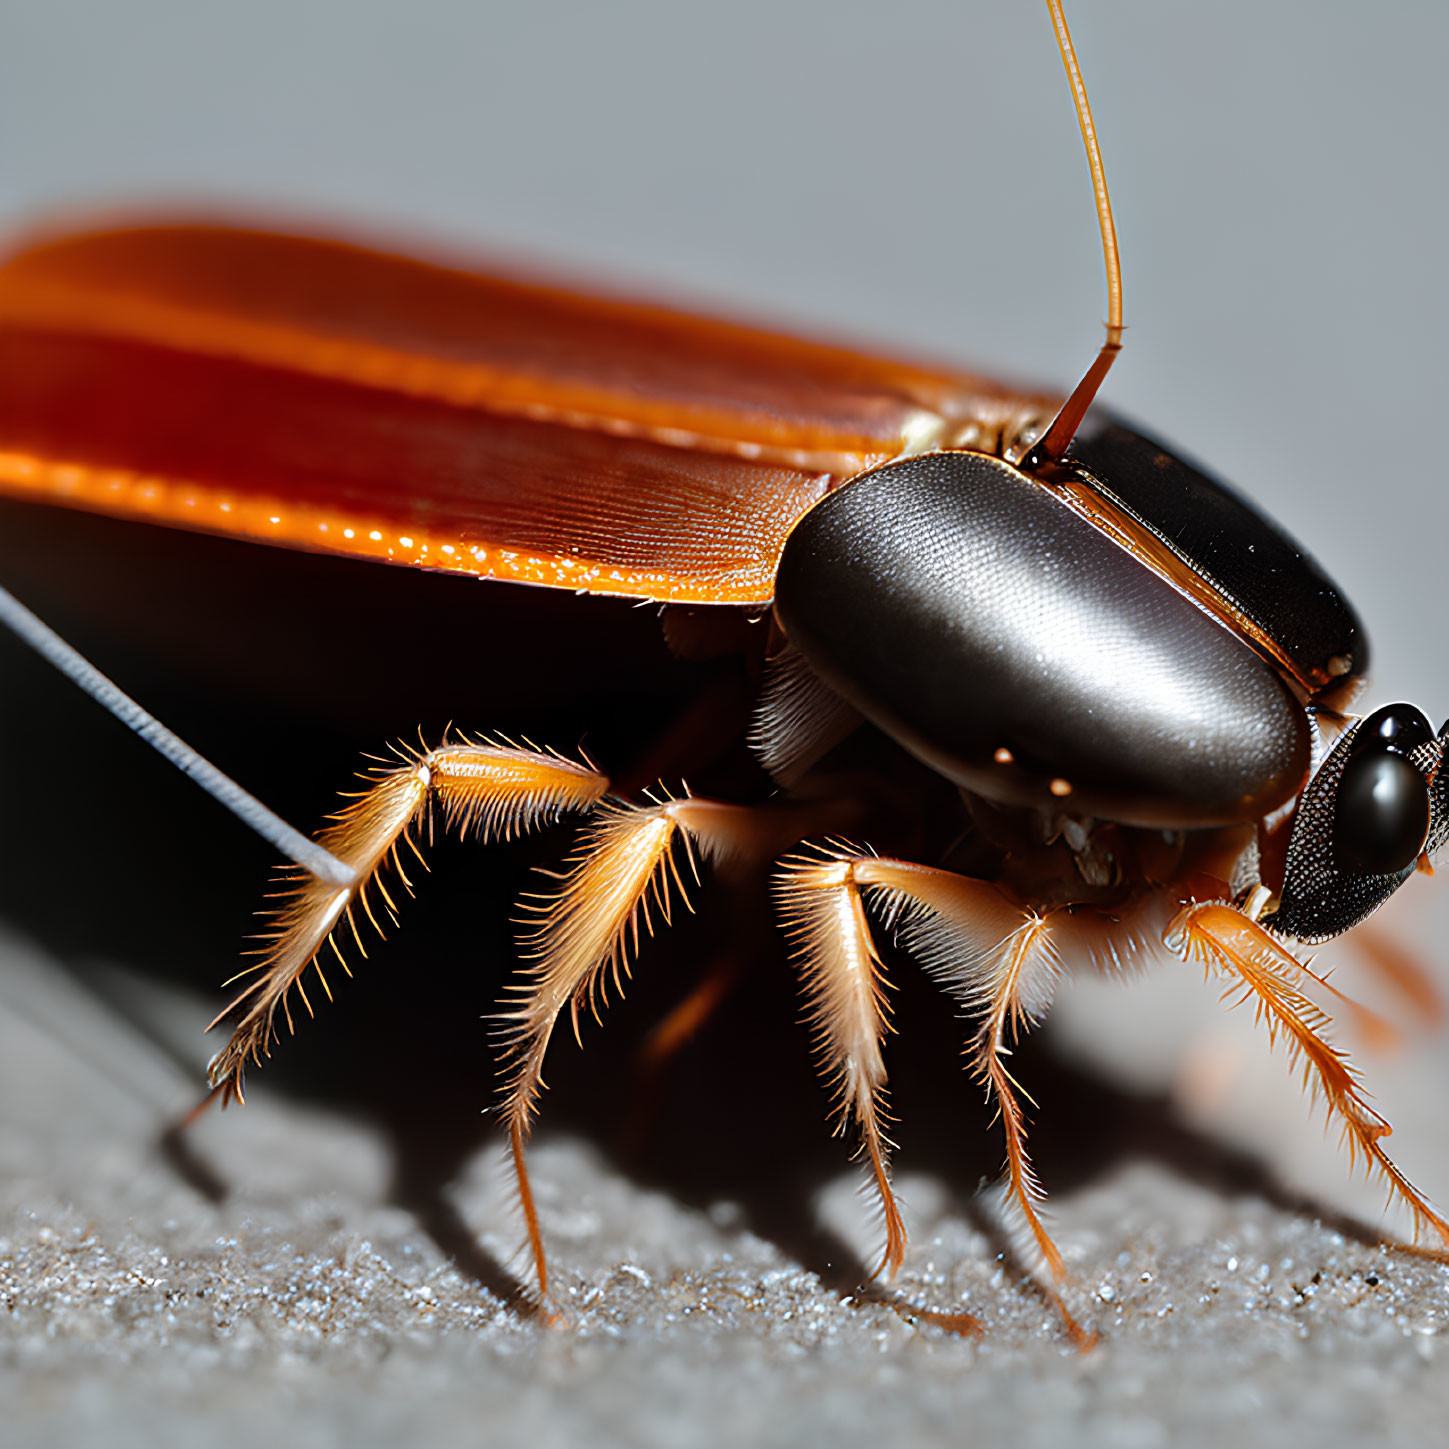 Detailed Close-up of Shiny Brown Cockroach on Textured Surface